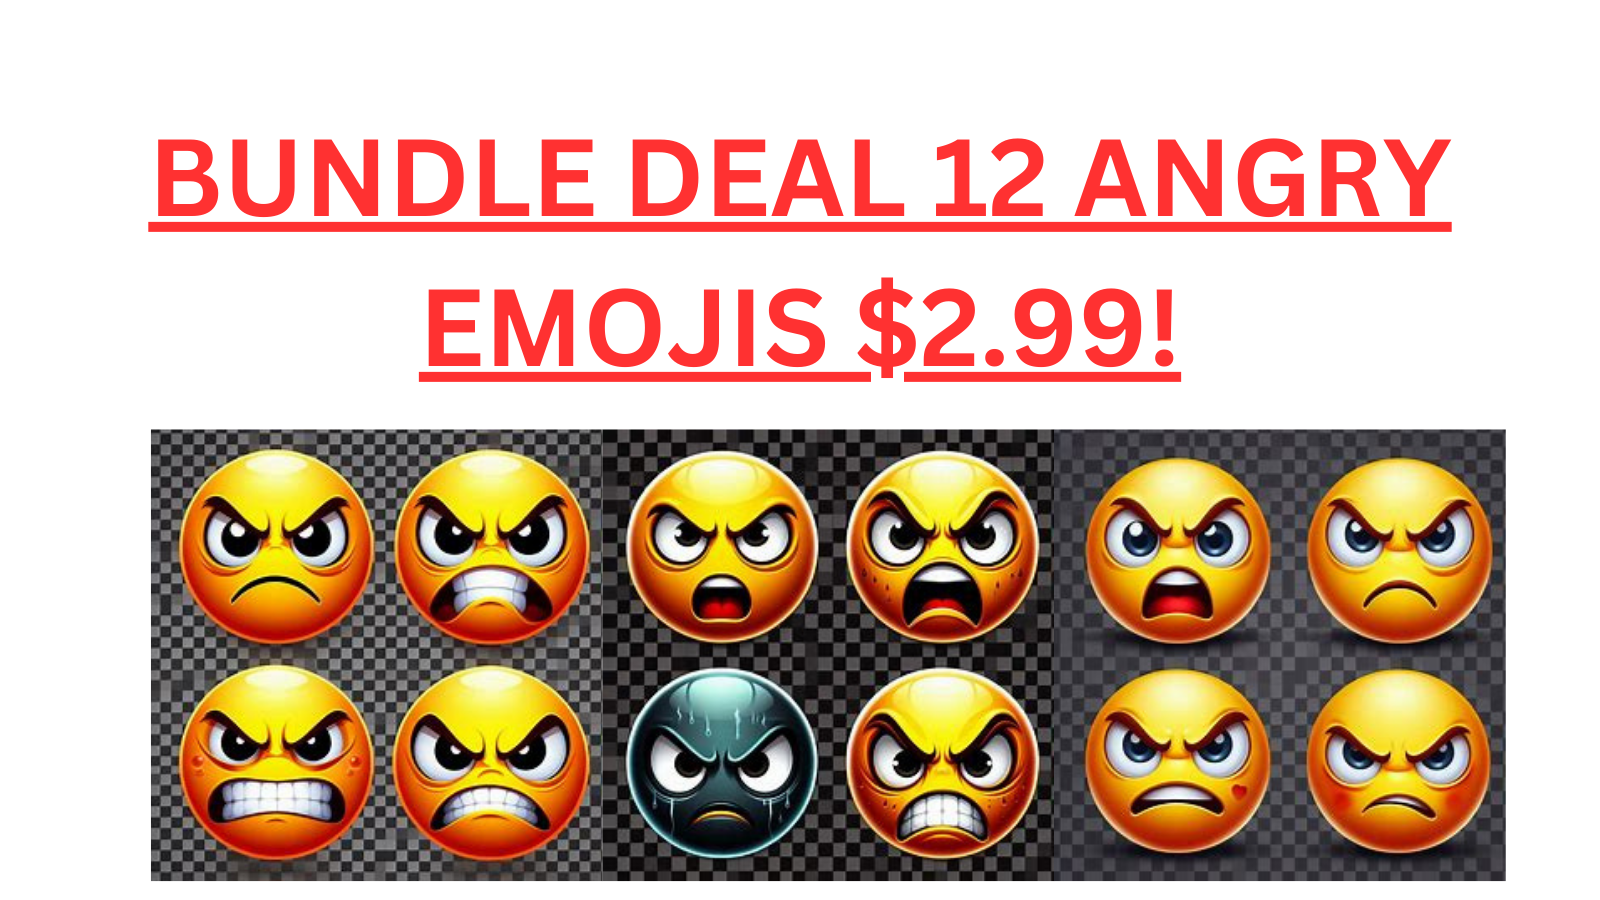 "Collection of various angry emoji faces expressing different levels of frustration and anger."